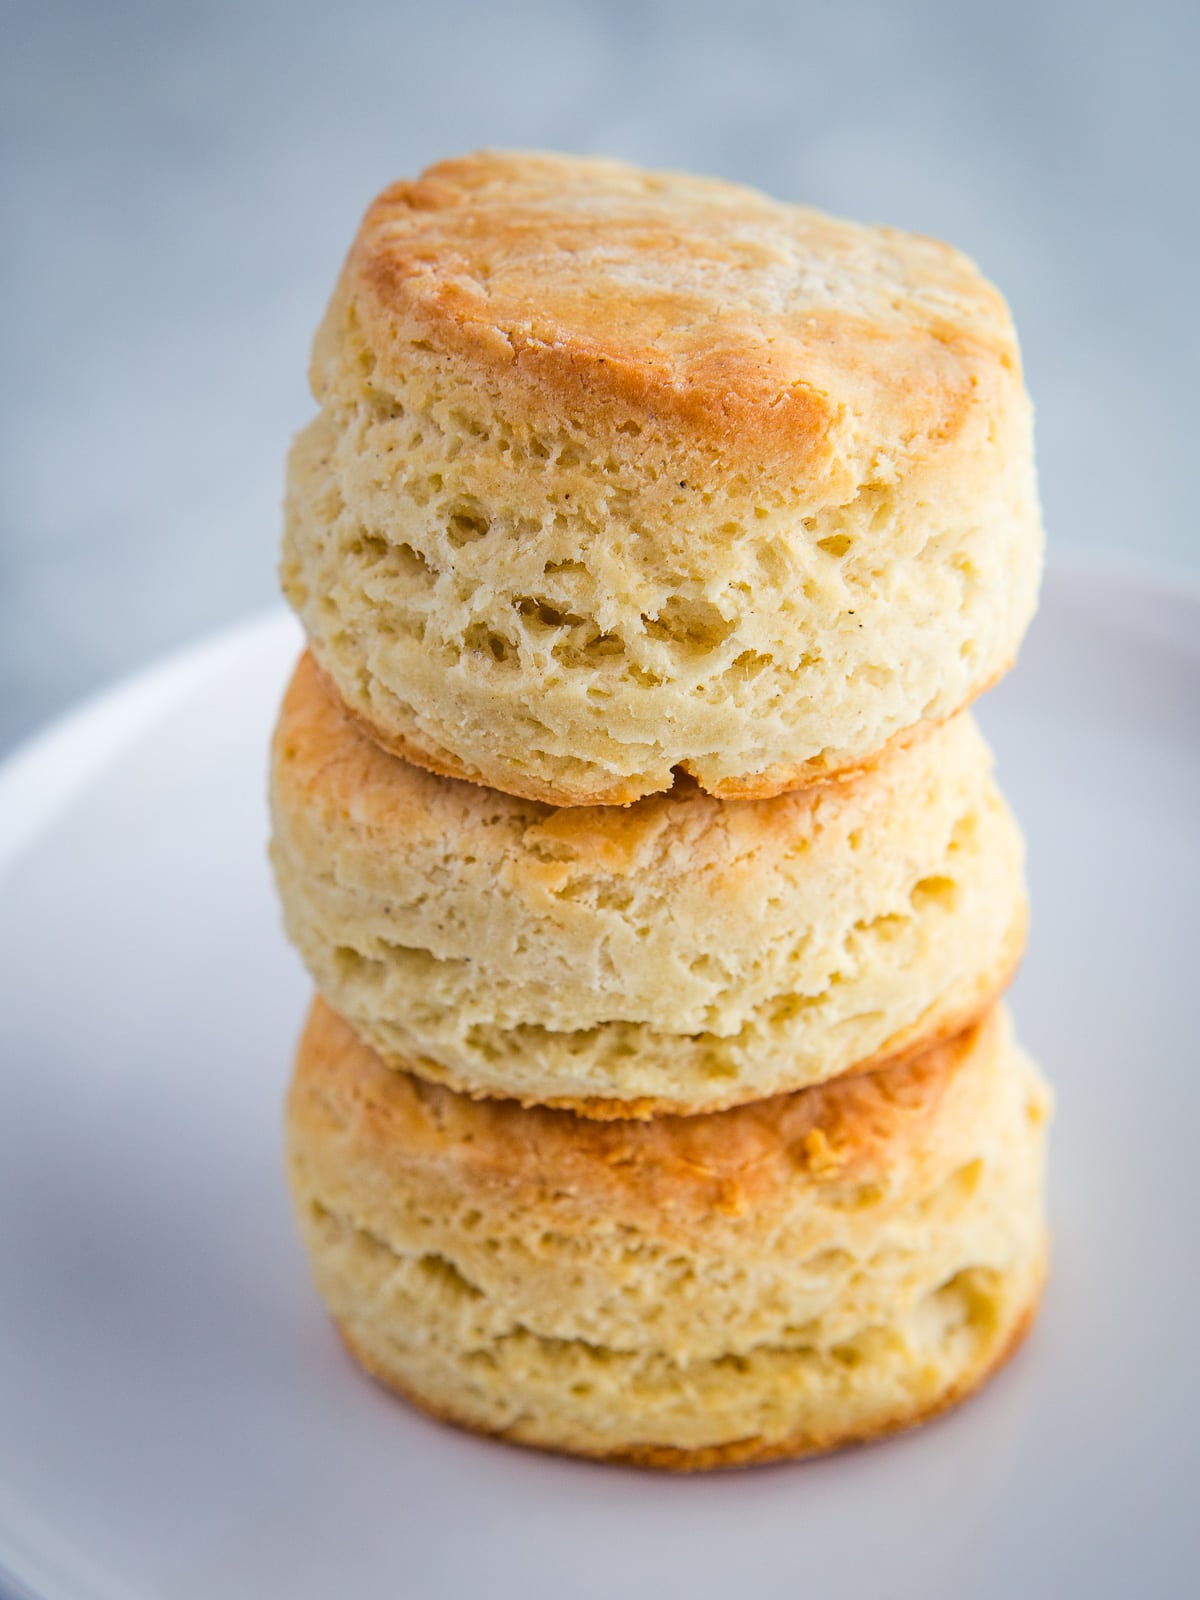 Three baked gluten-free biscuits in a stack.